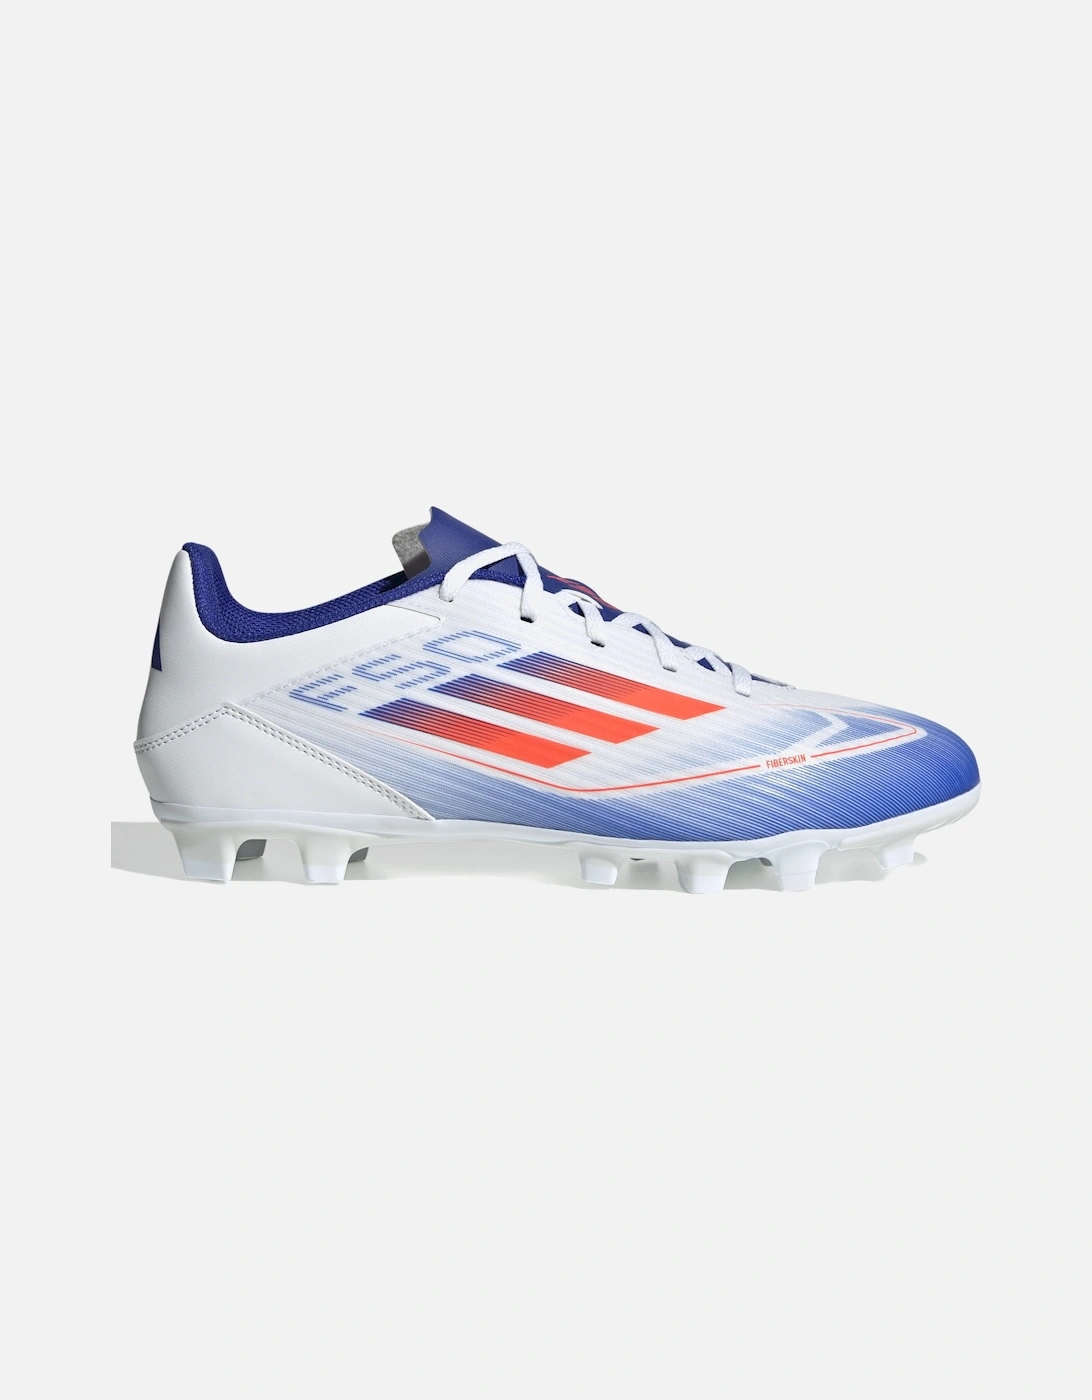 Mens F50 Club FxG Football Boots (White/Blue/Red), 9 of 8